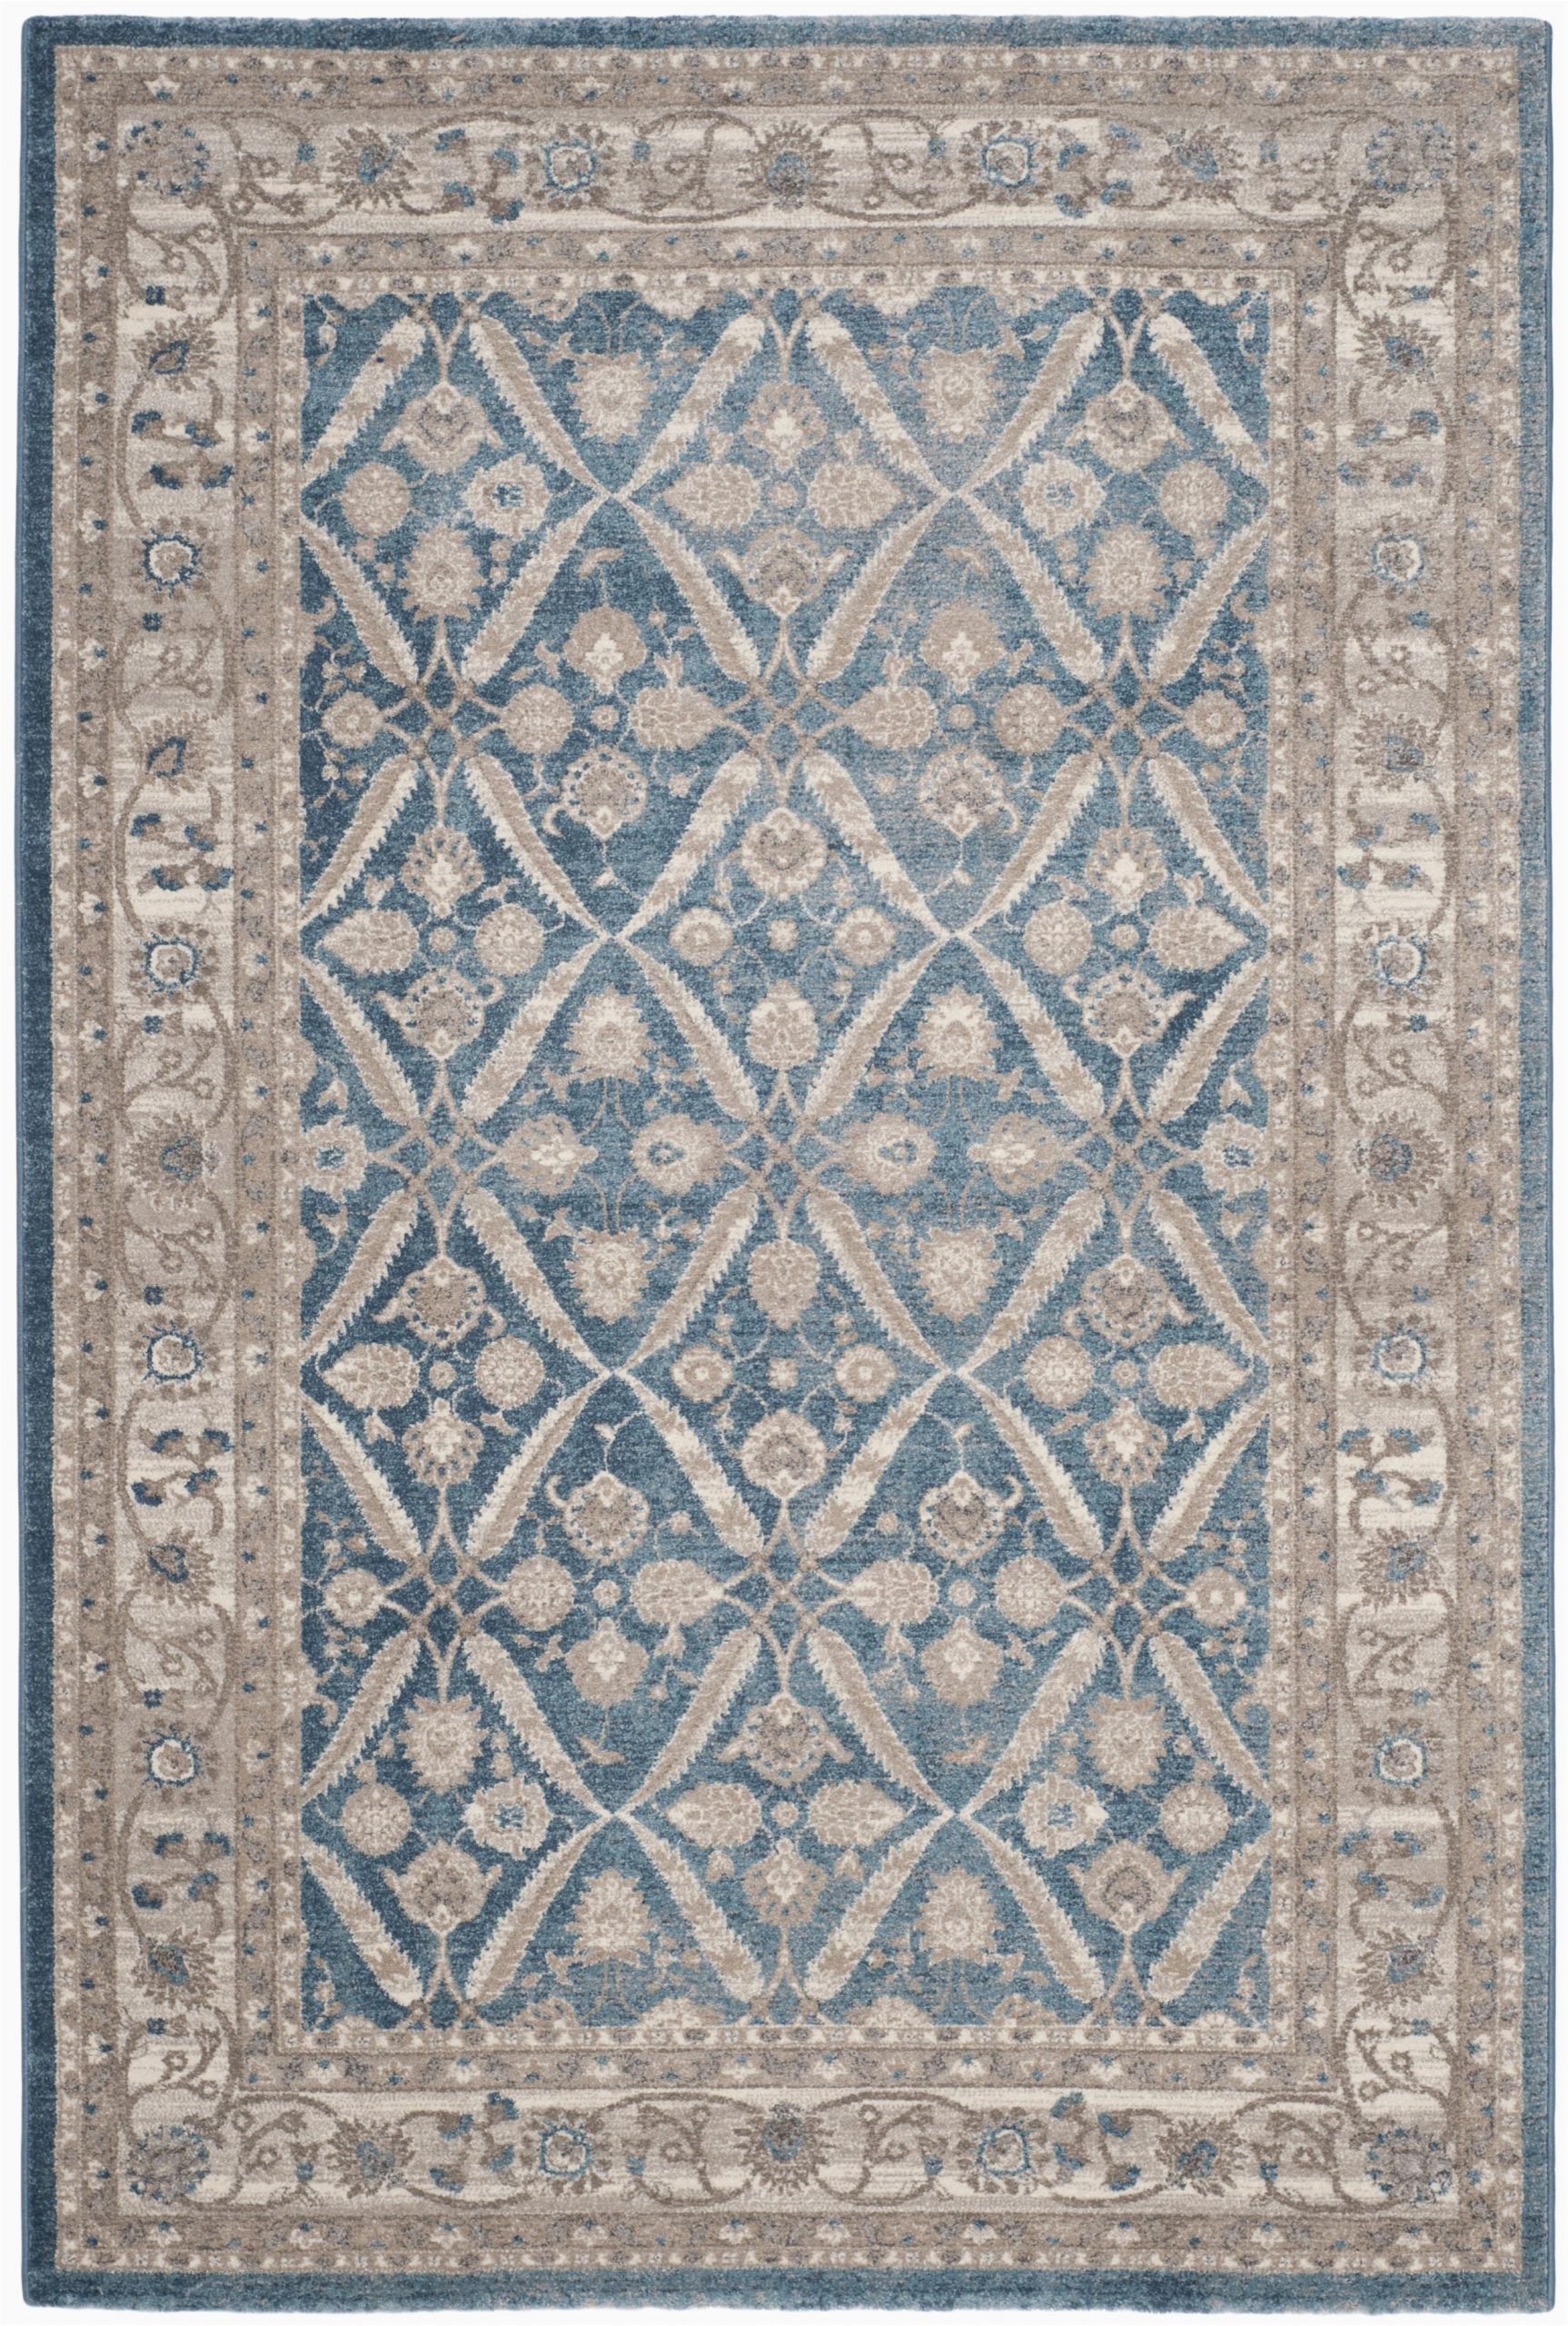 Navy Blue and Beige area Rugs Statham oriental Blue Beige area Rug